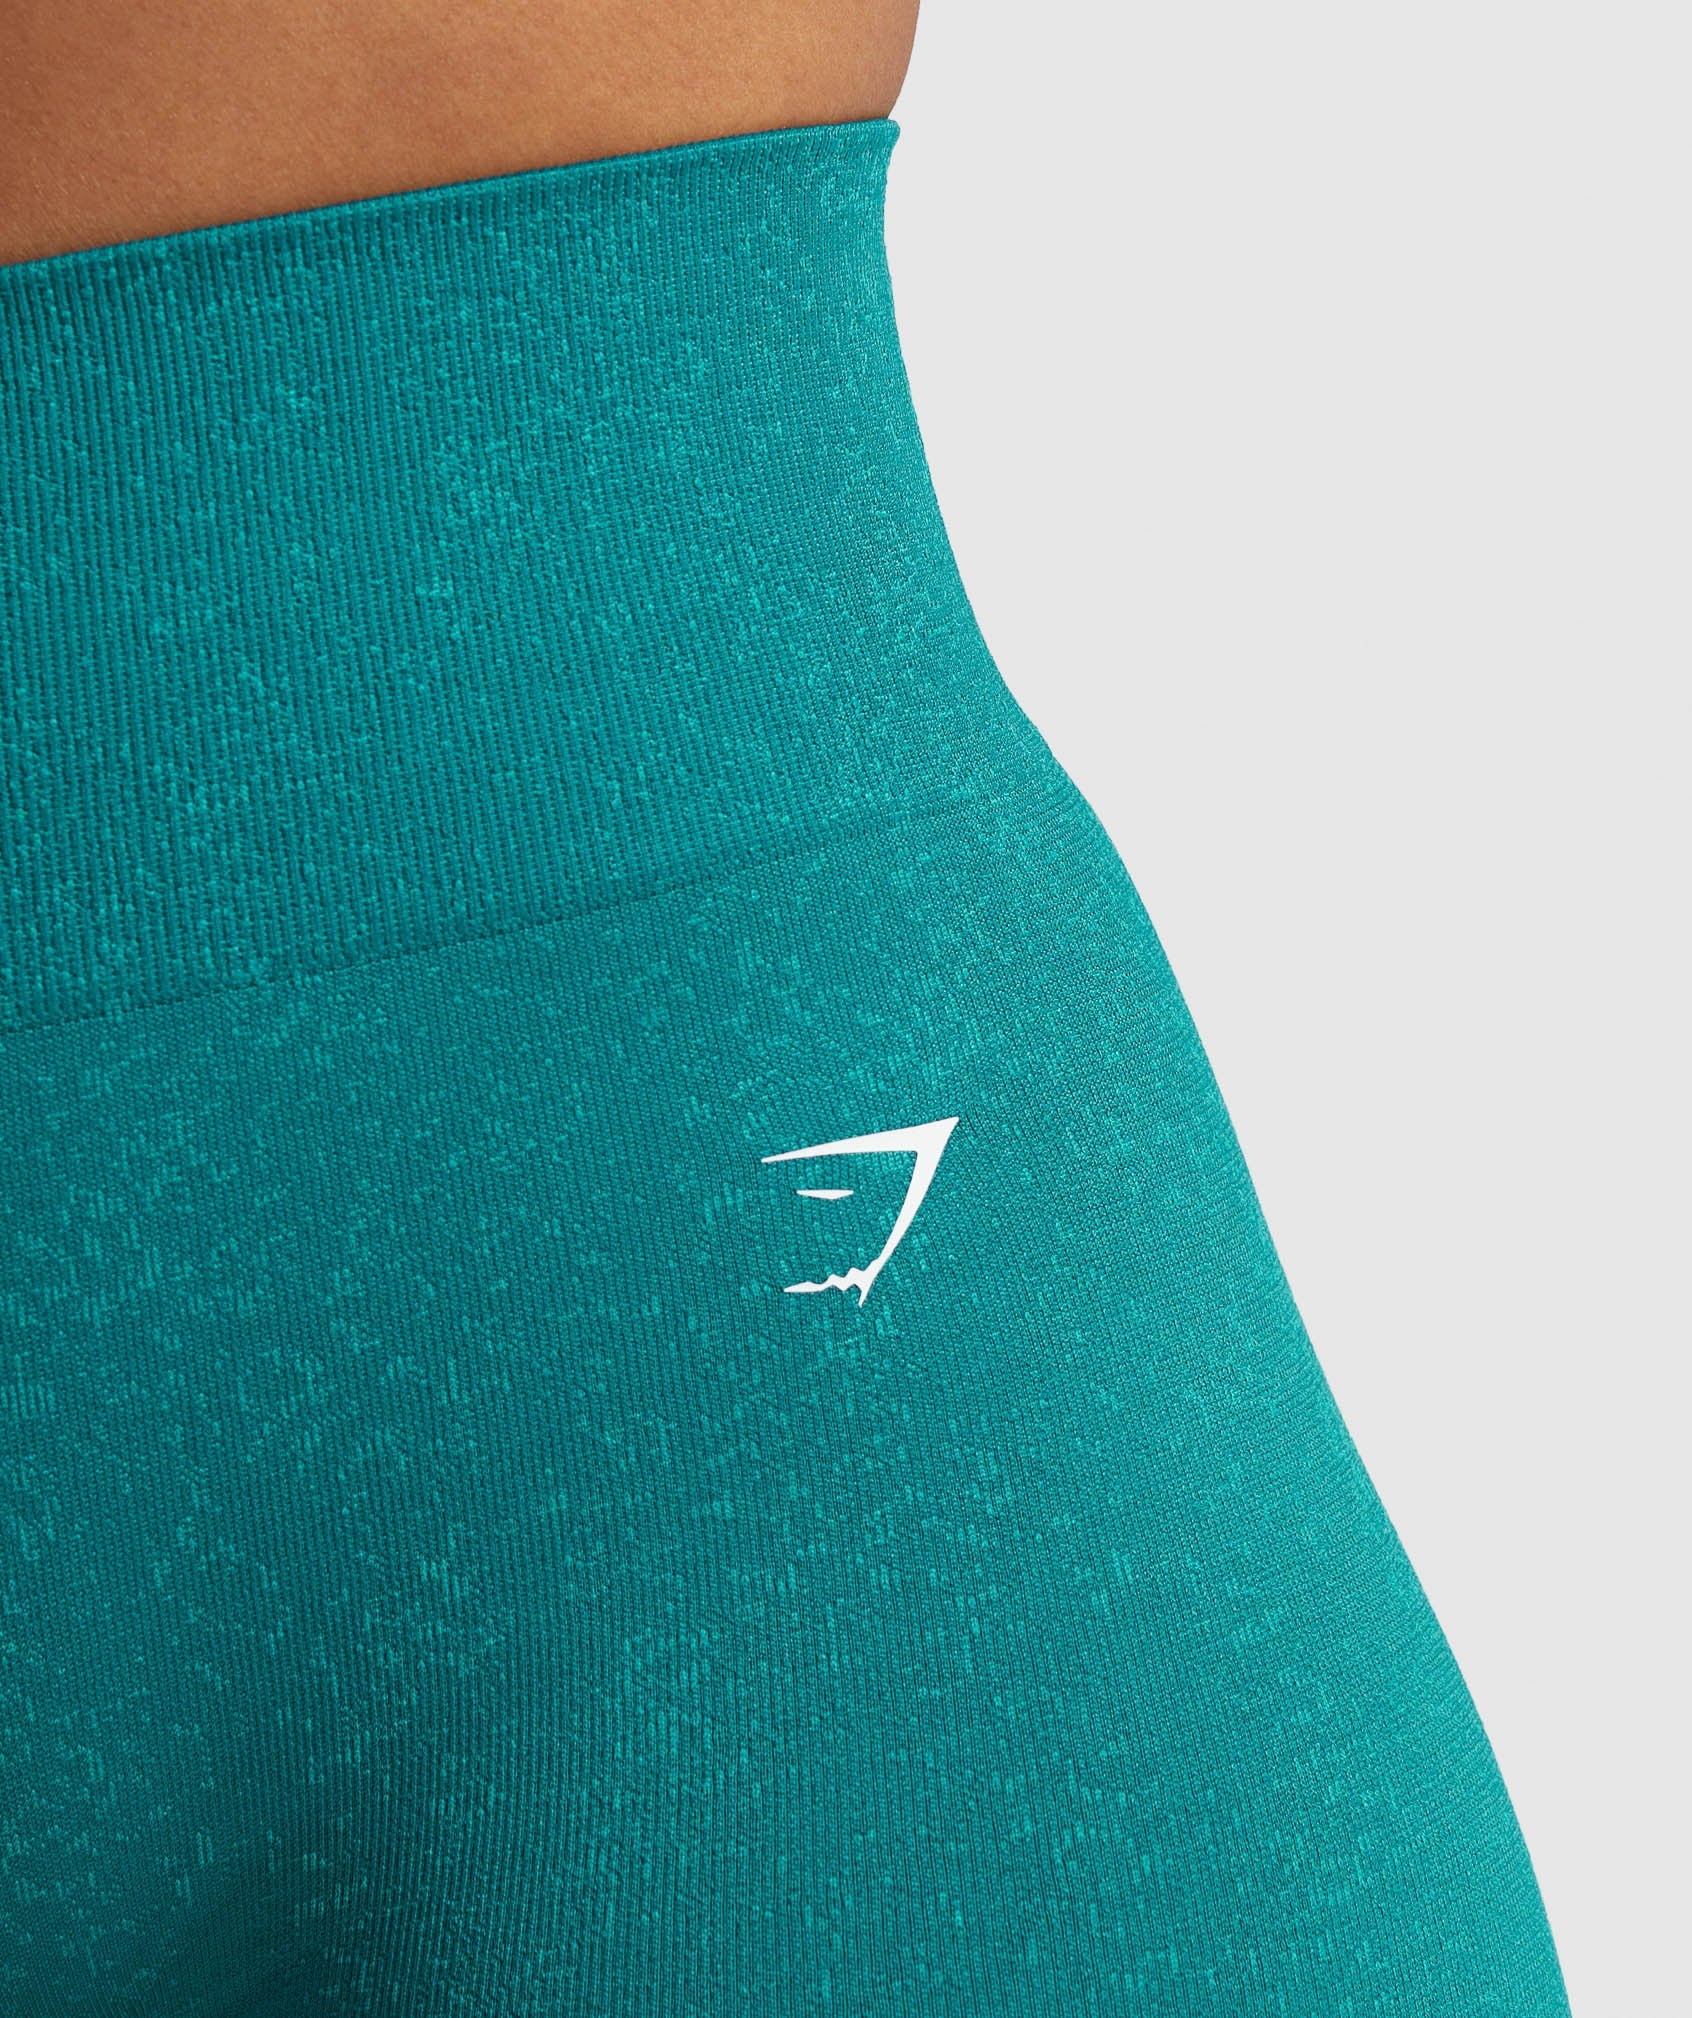 Adapt Fleck Seamless Shorts in Ocean Teal/Artificial Teal - view 6